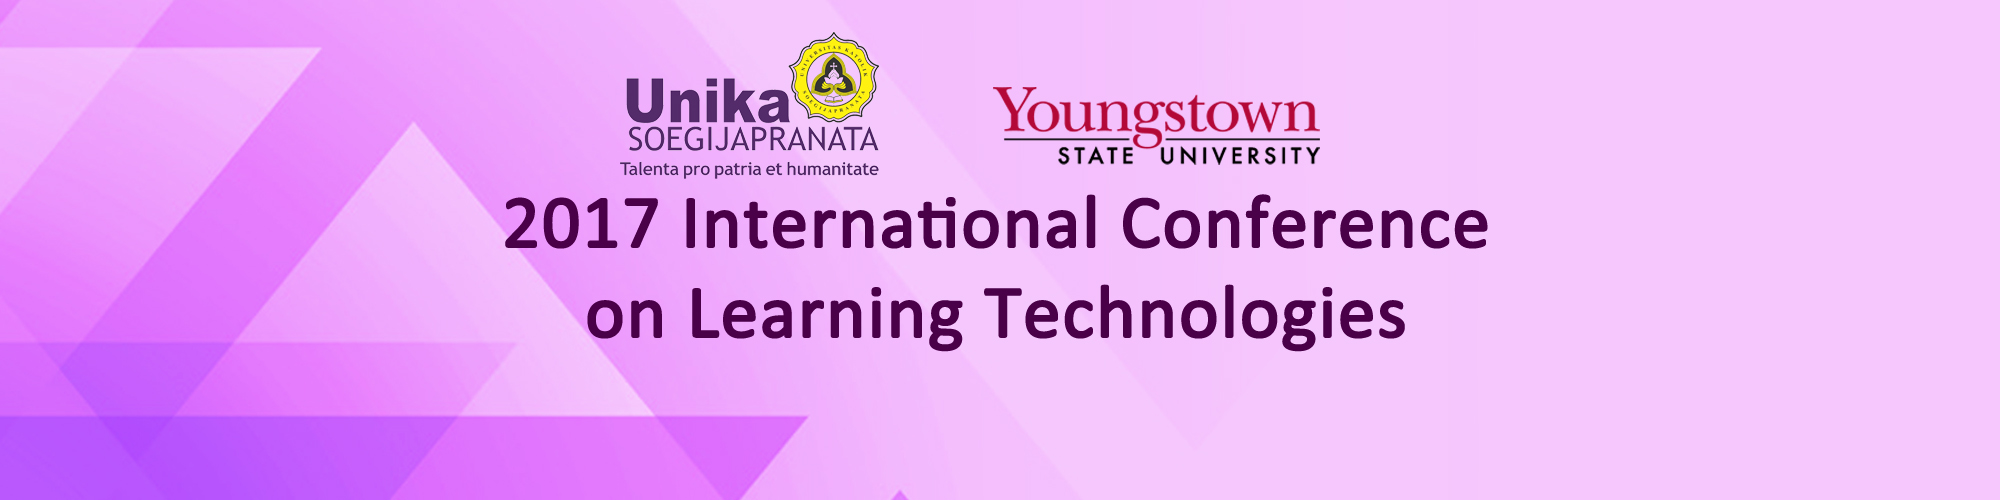 This conference aims at exploring the transformative potential of digital technologies for lifelong learning, reinventing ways to increase student engagement and learning experiences, and evaluating the application of digital technologies in society. 